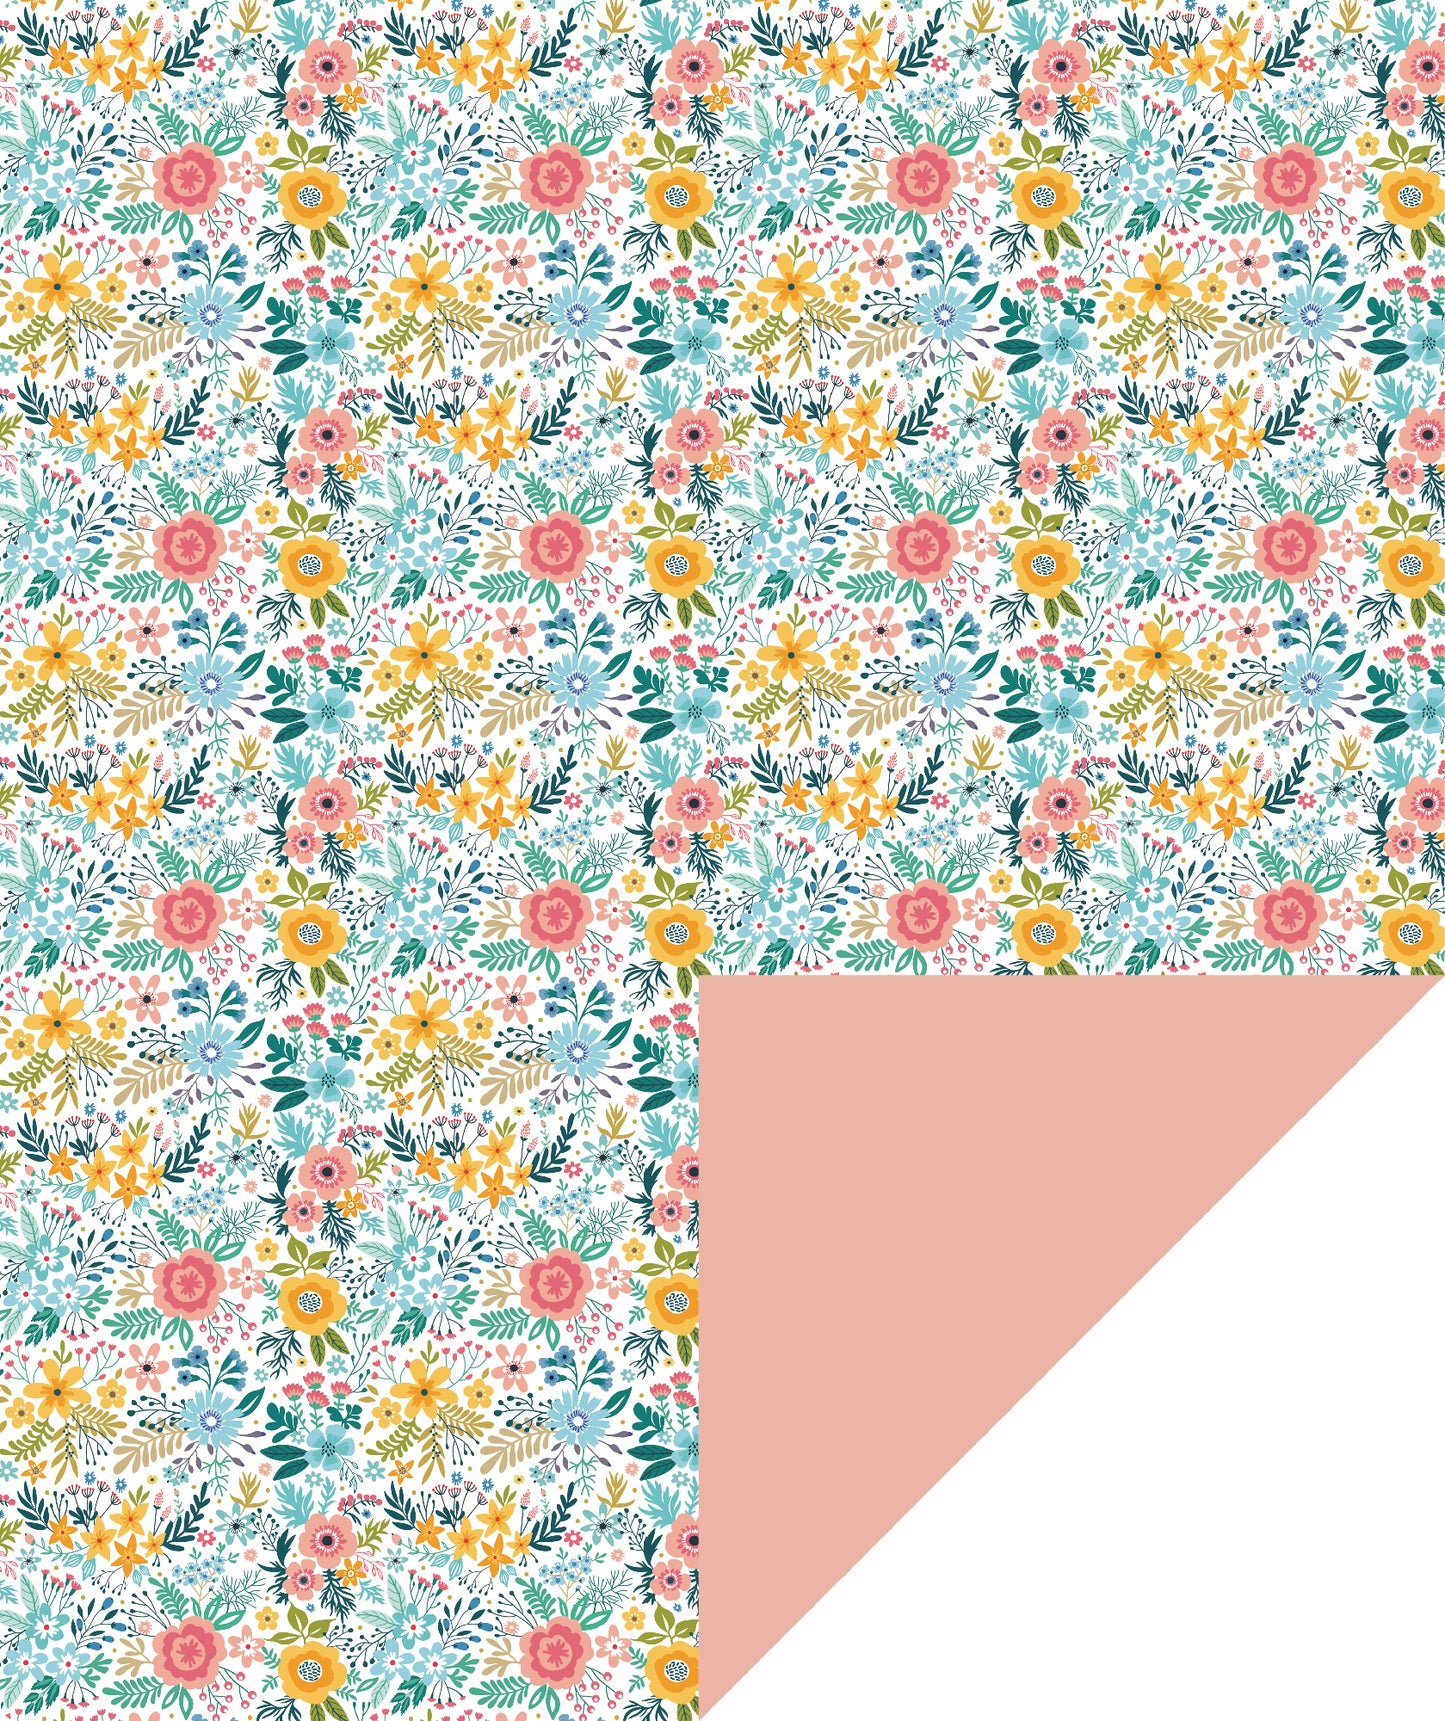 Spring Flowers & Plants Wrapping Paper with Brush Pink Color Packing Paper Supply Wrapaholic